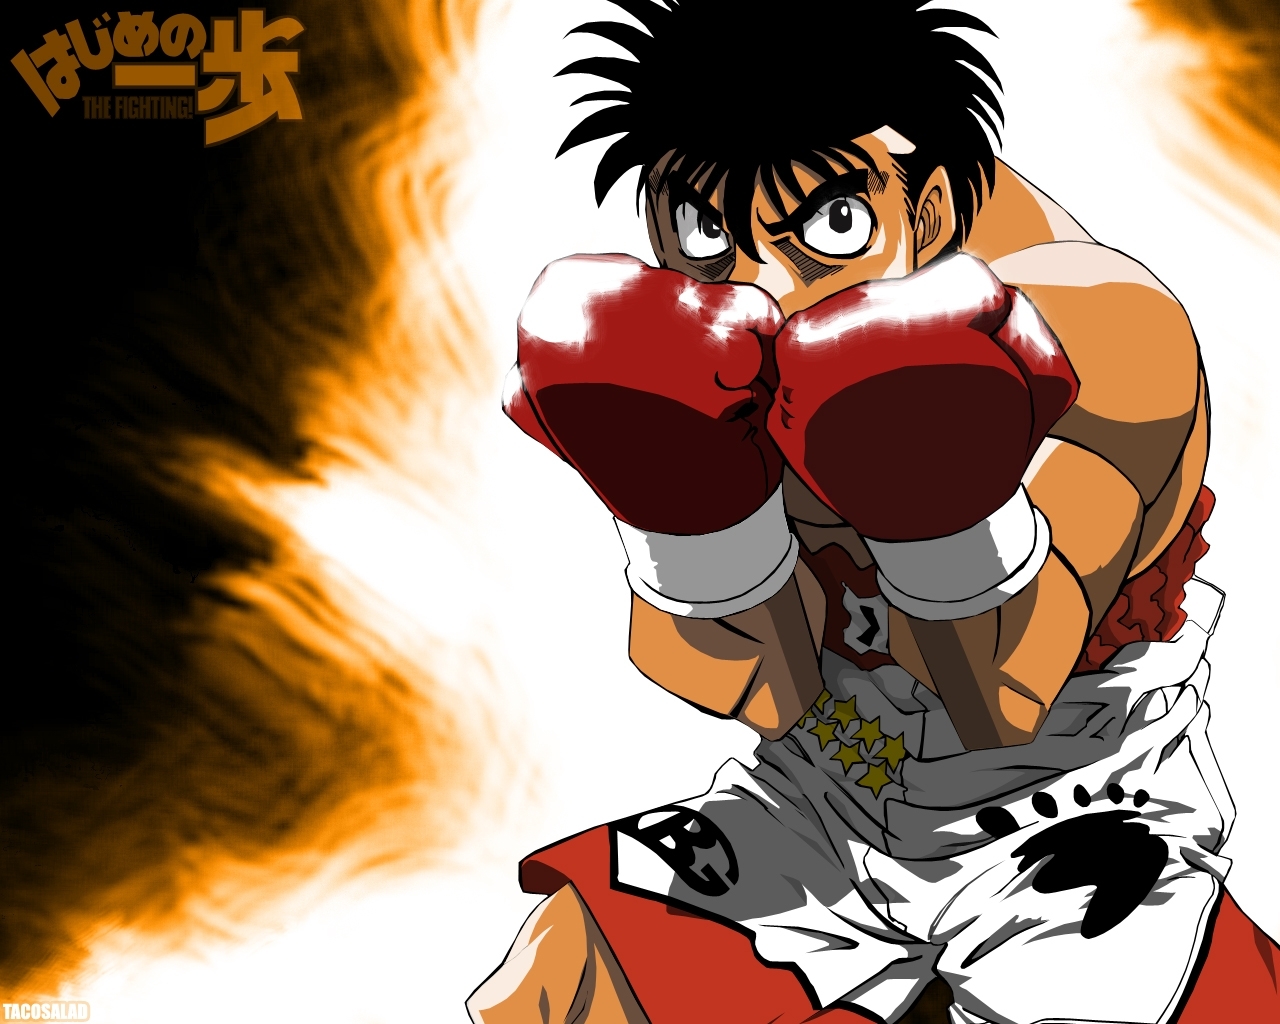 10 New Hajime No Ippo Wallpapers FULL HD 1920×1080 For PC Background 2020